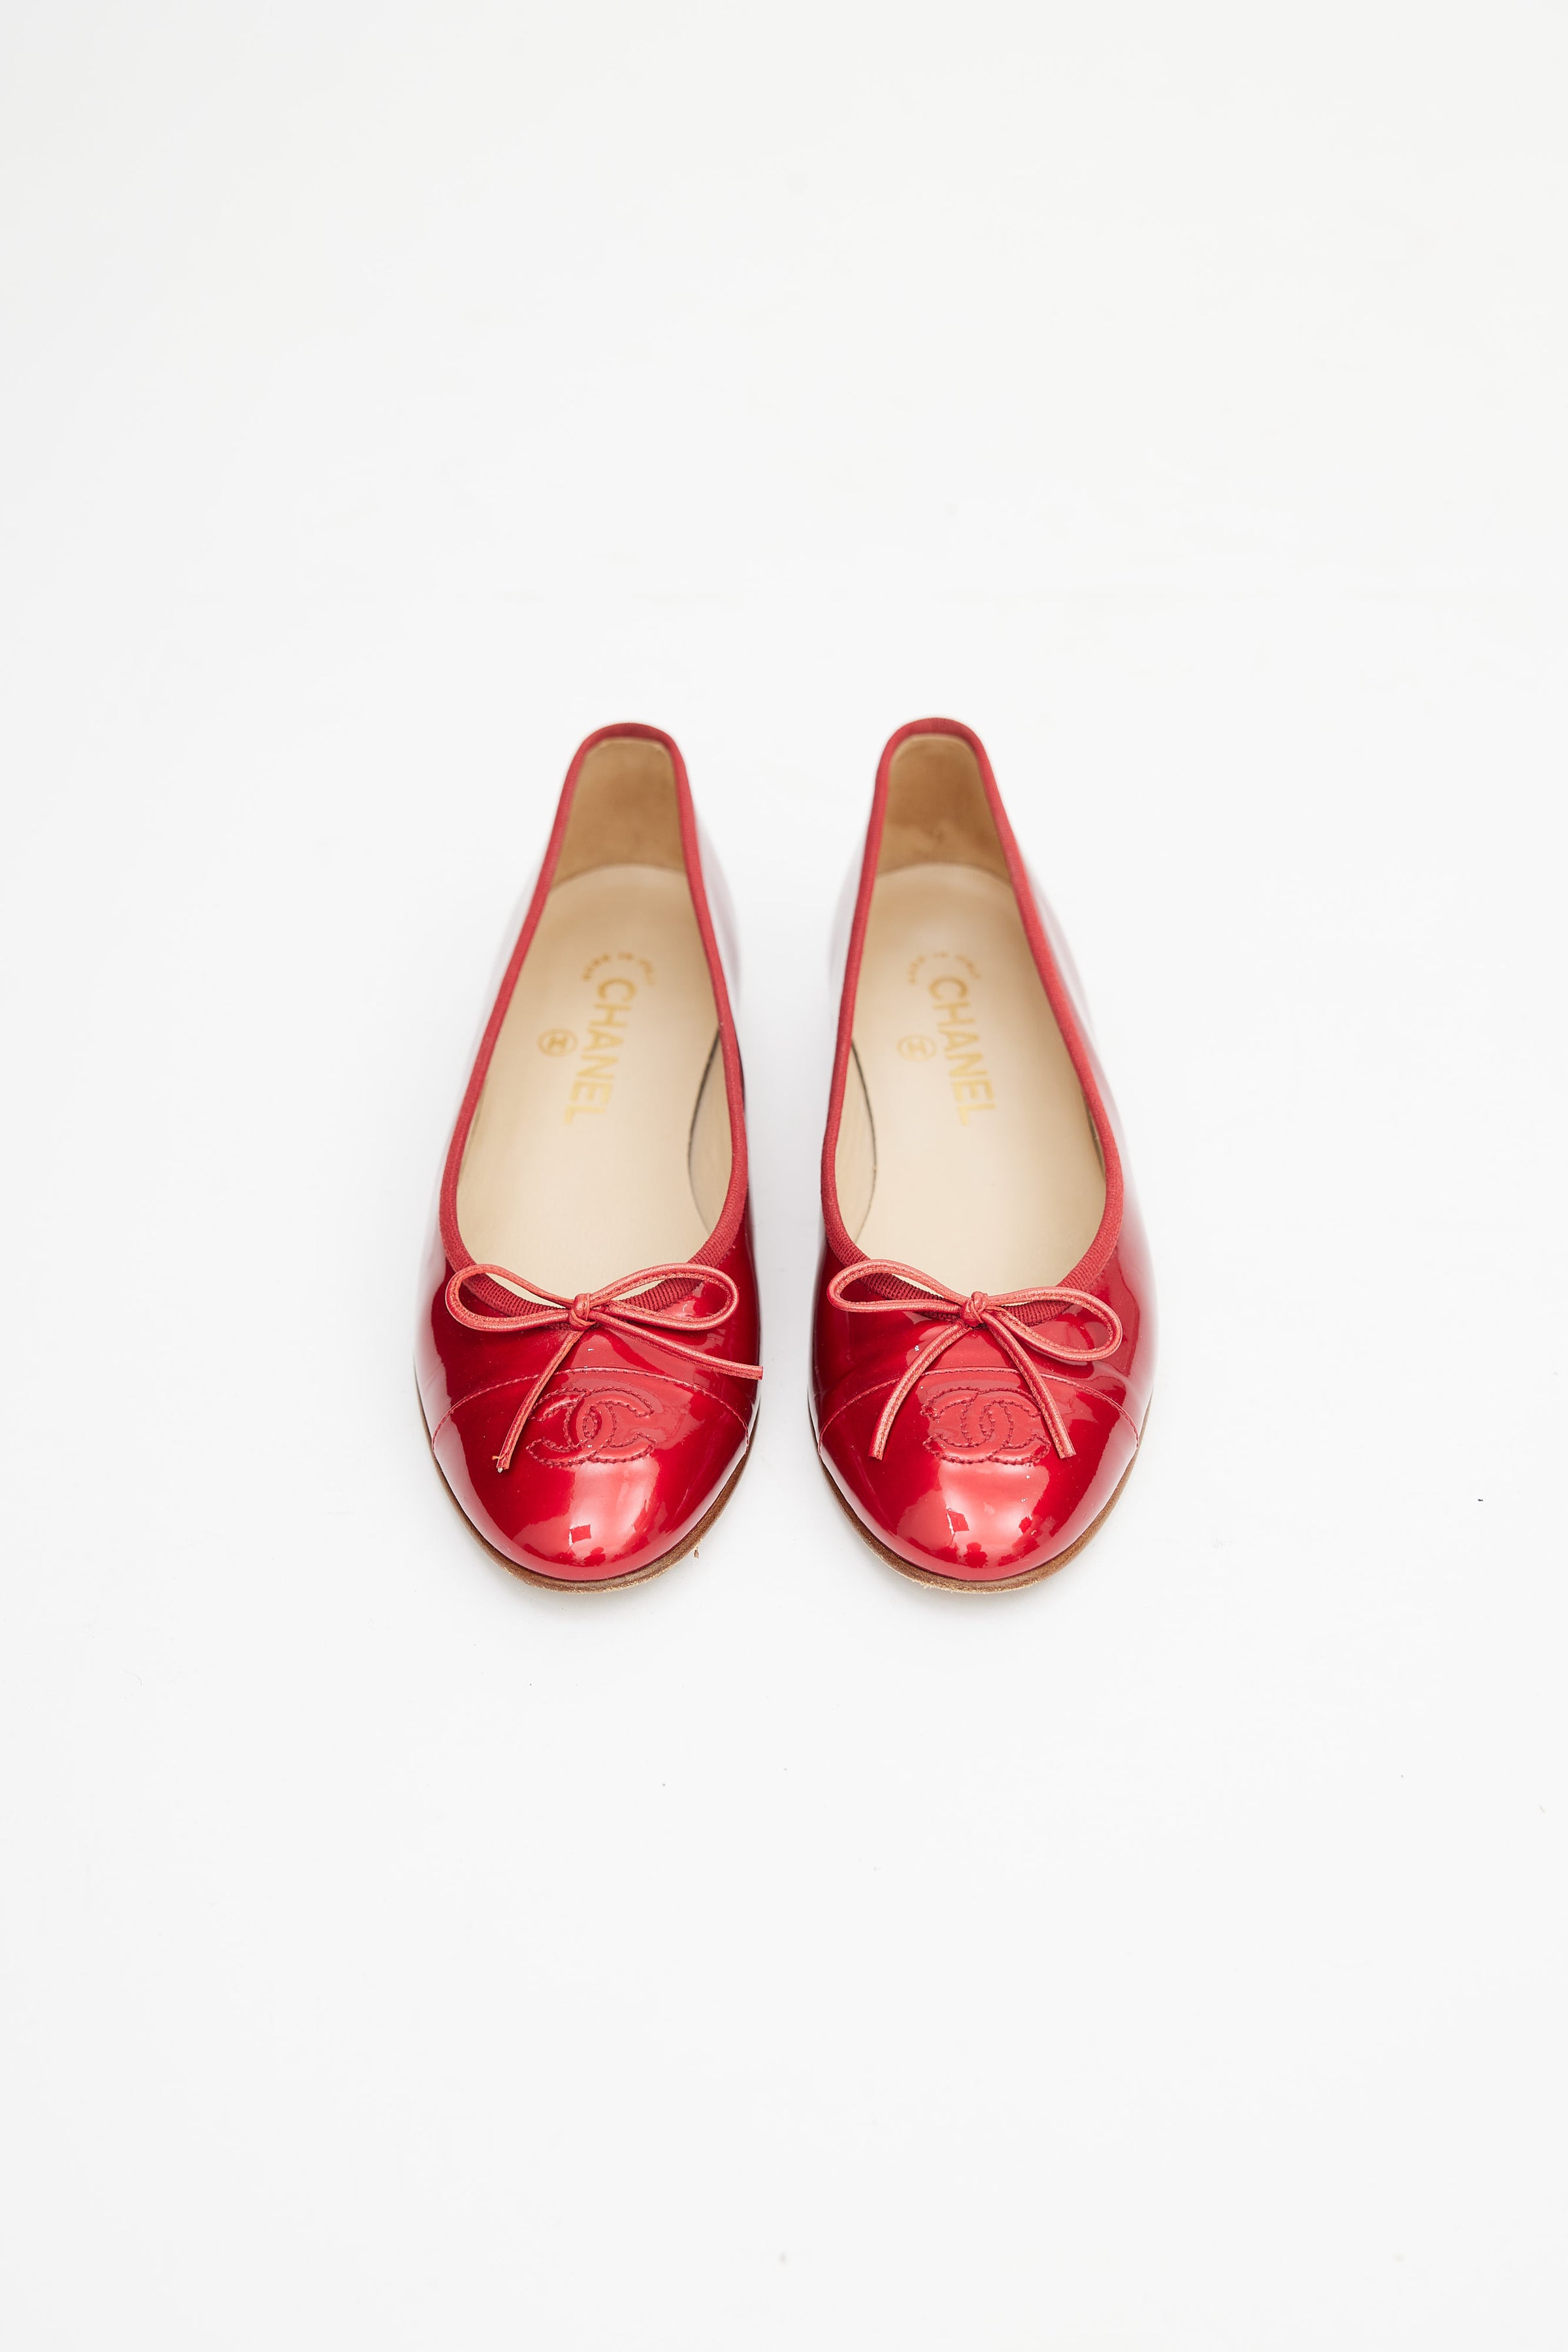 Chanel Red Patent Ballerinaer - Size 38